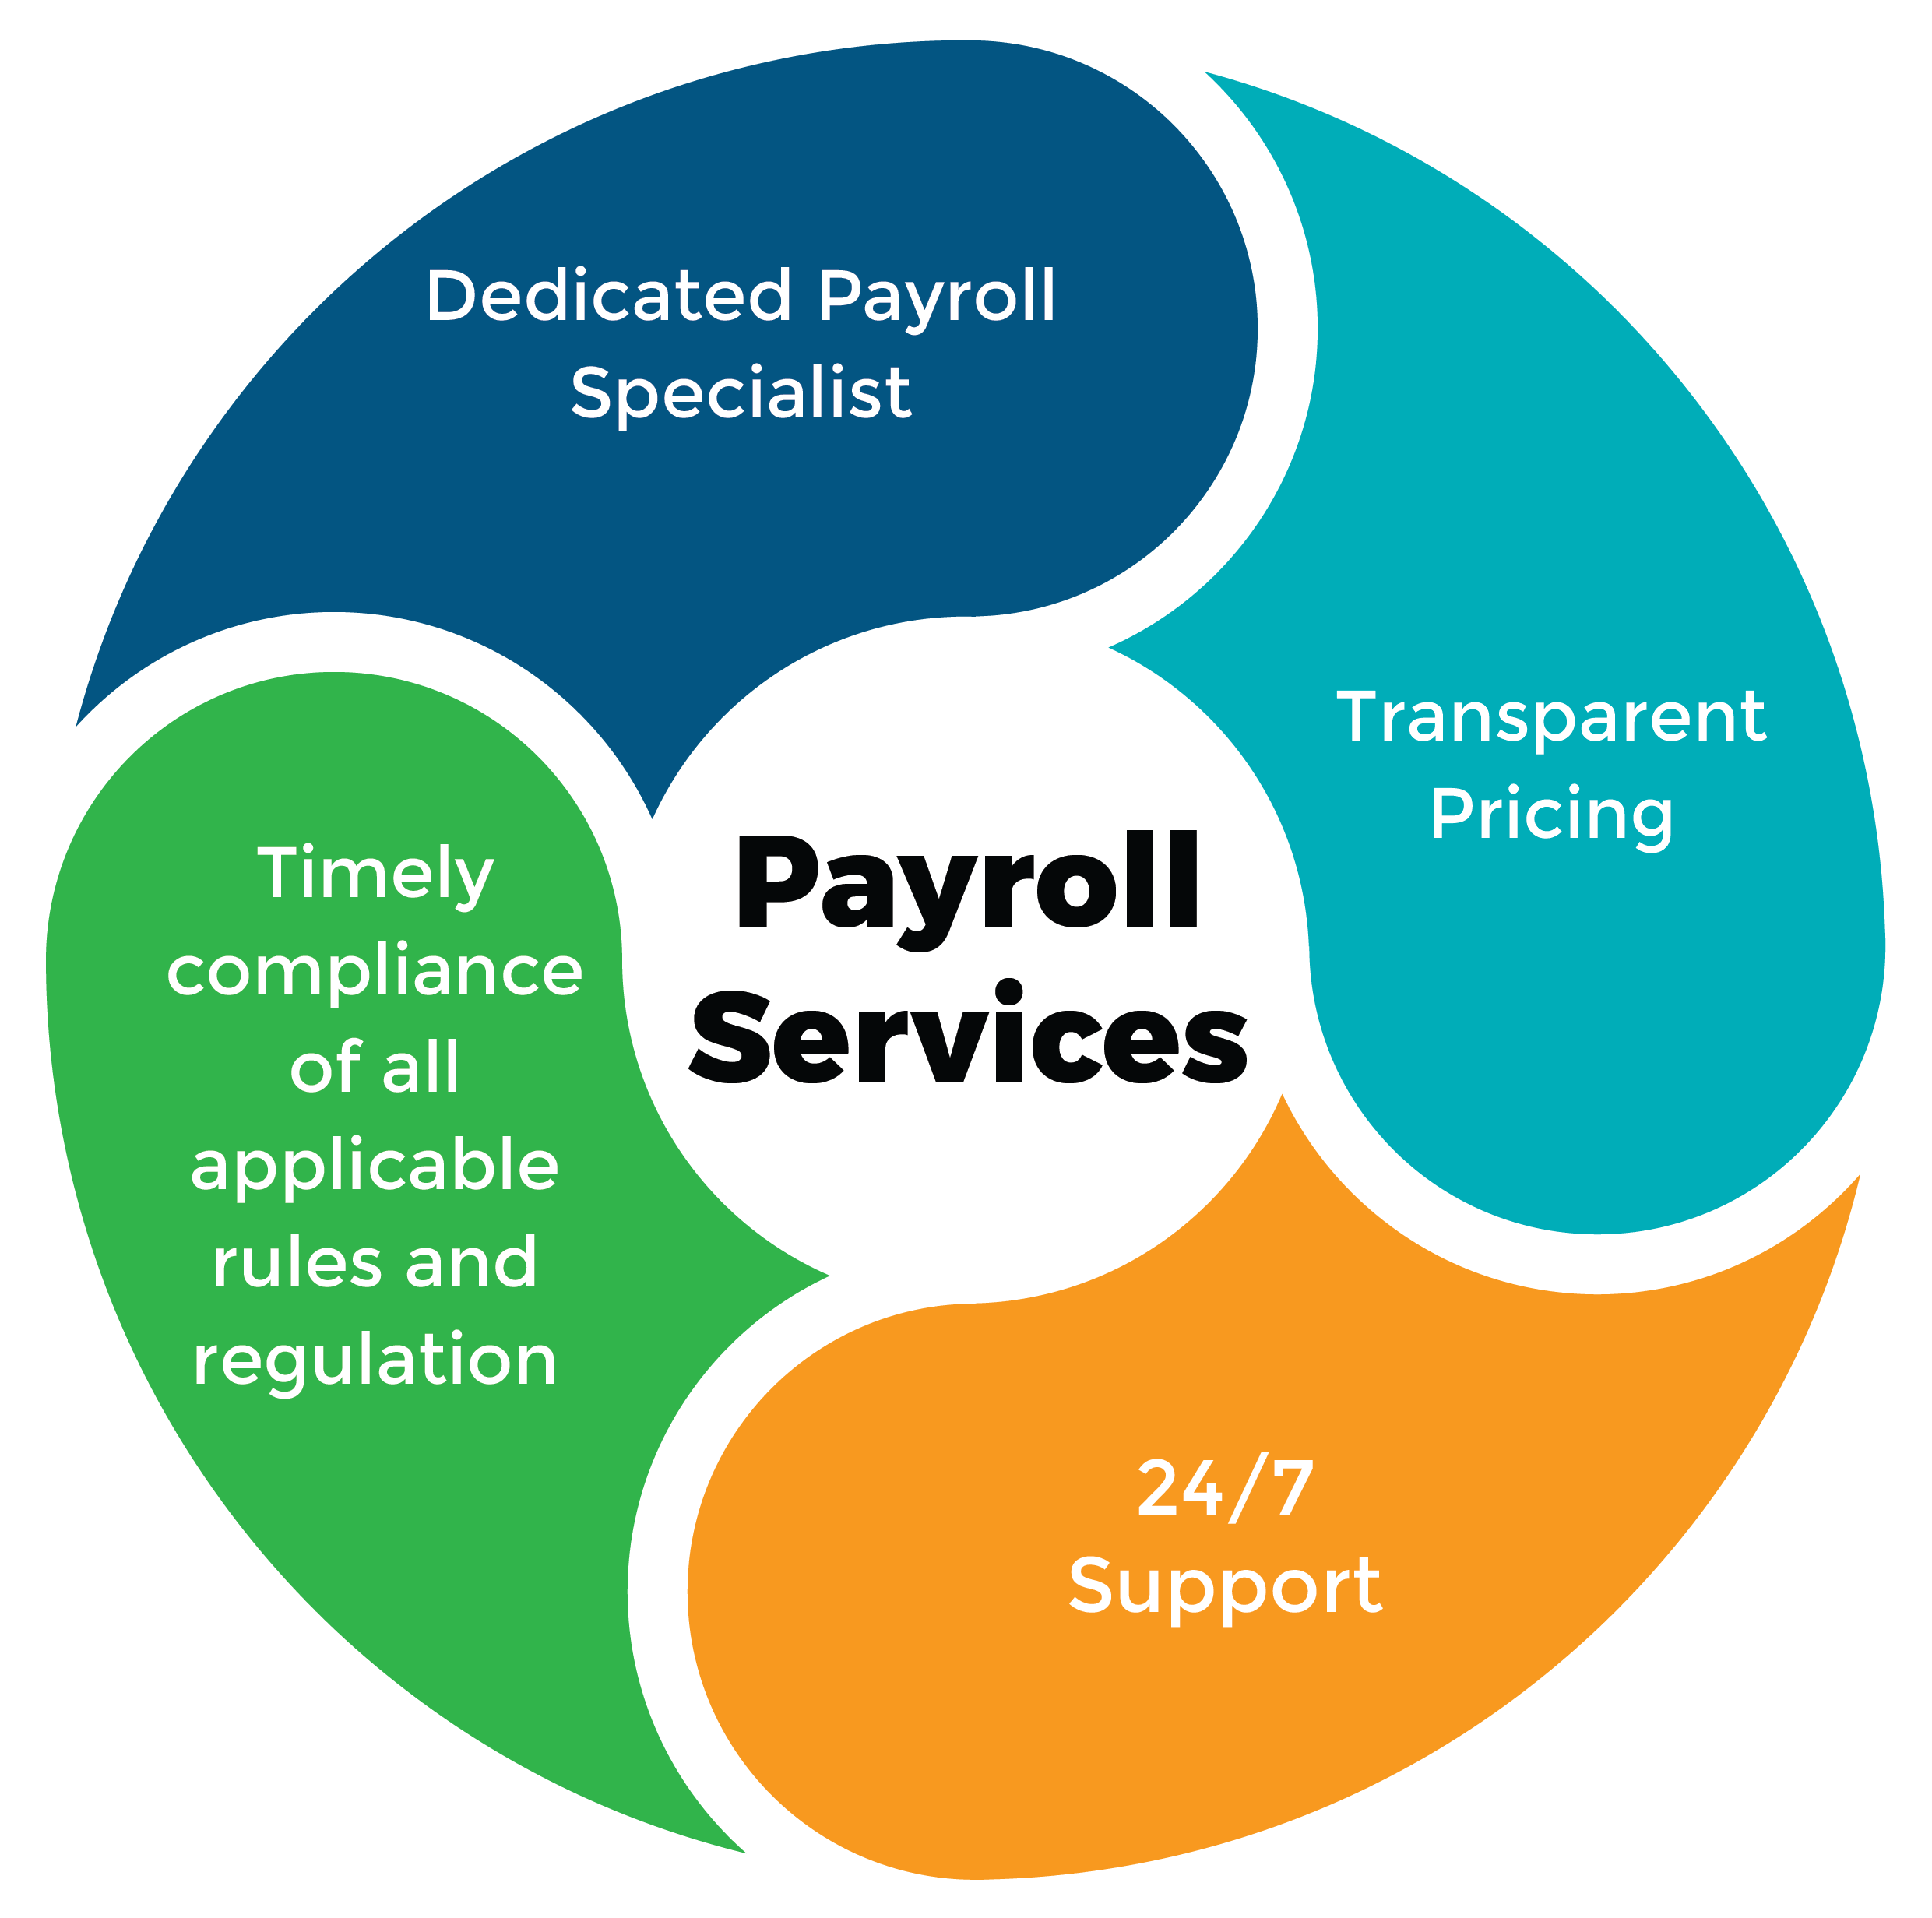 https://synergygbl.com/wp-content/uploads/2021/05/payroll-services.png